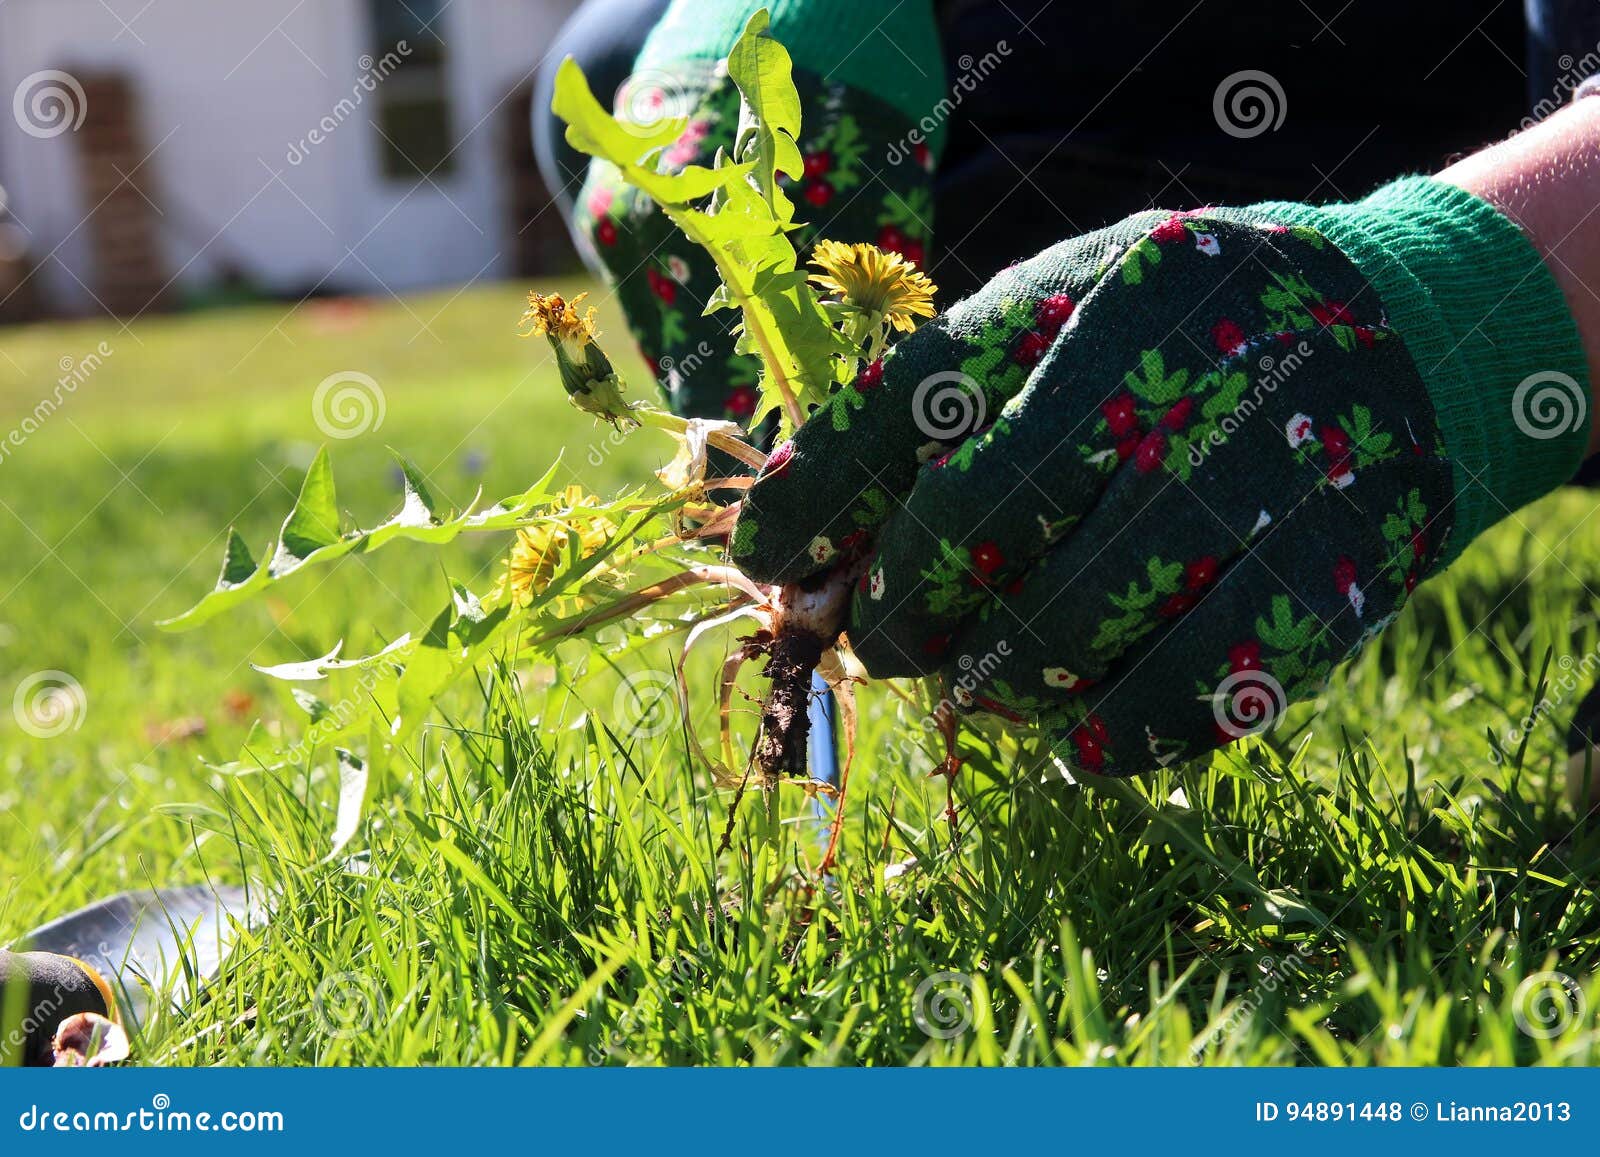 a man pulling dandelion / weeds out from the grass loan